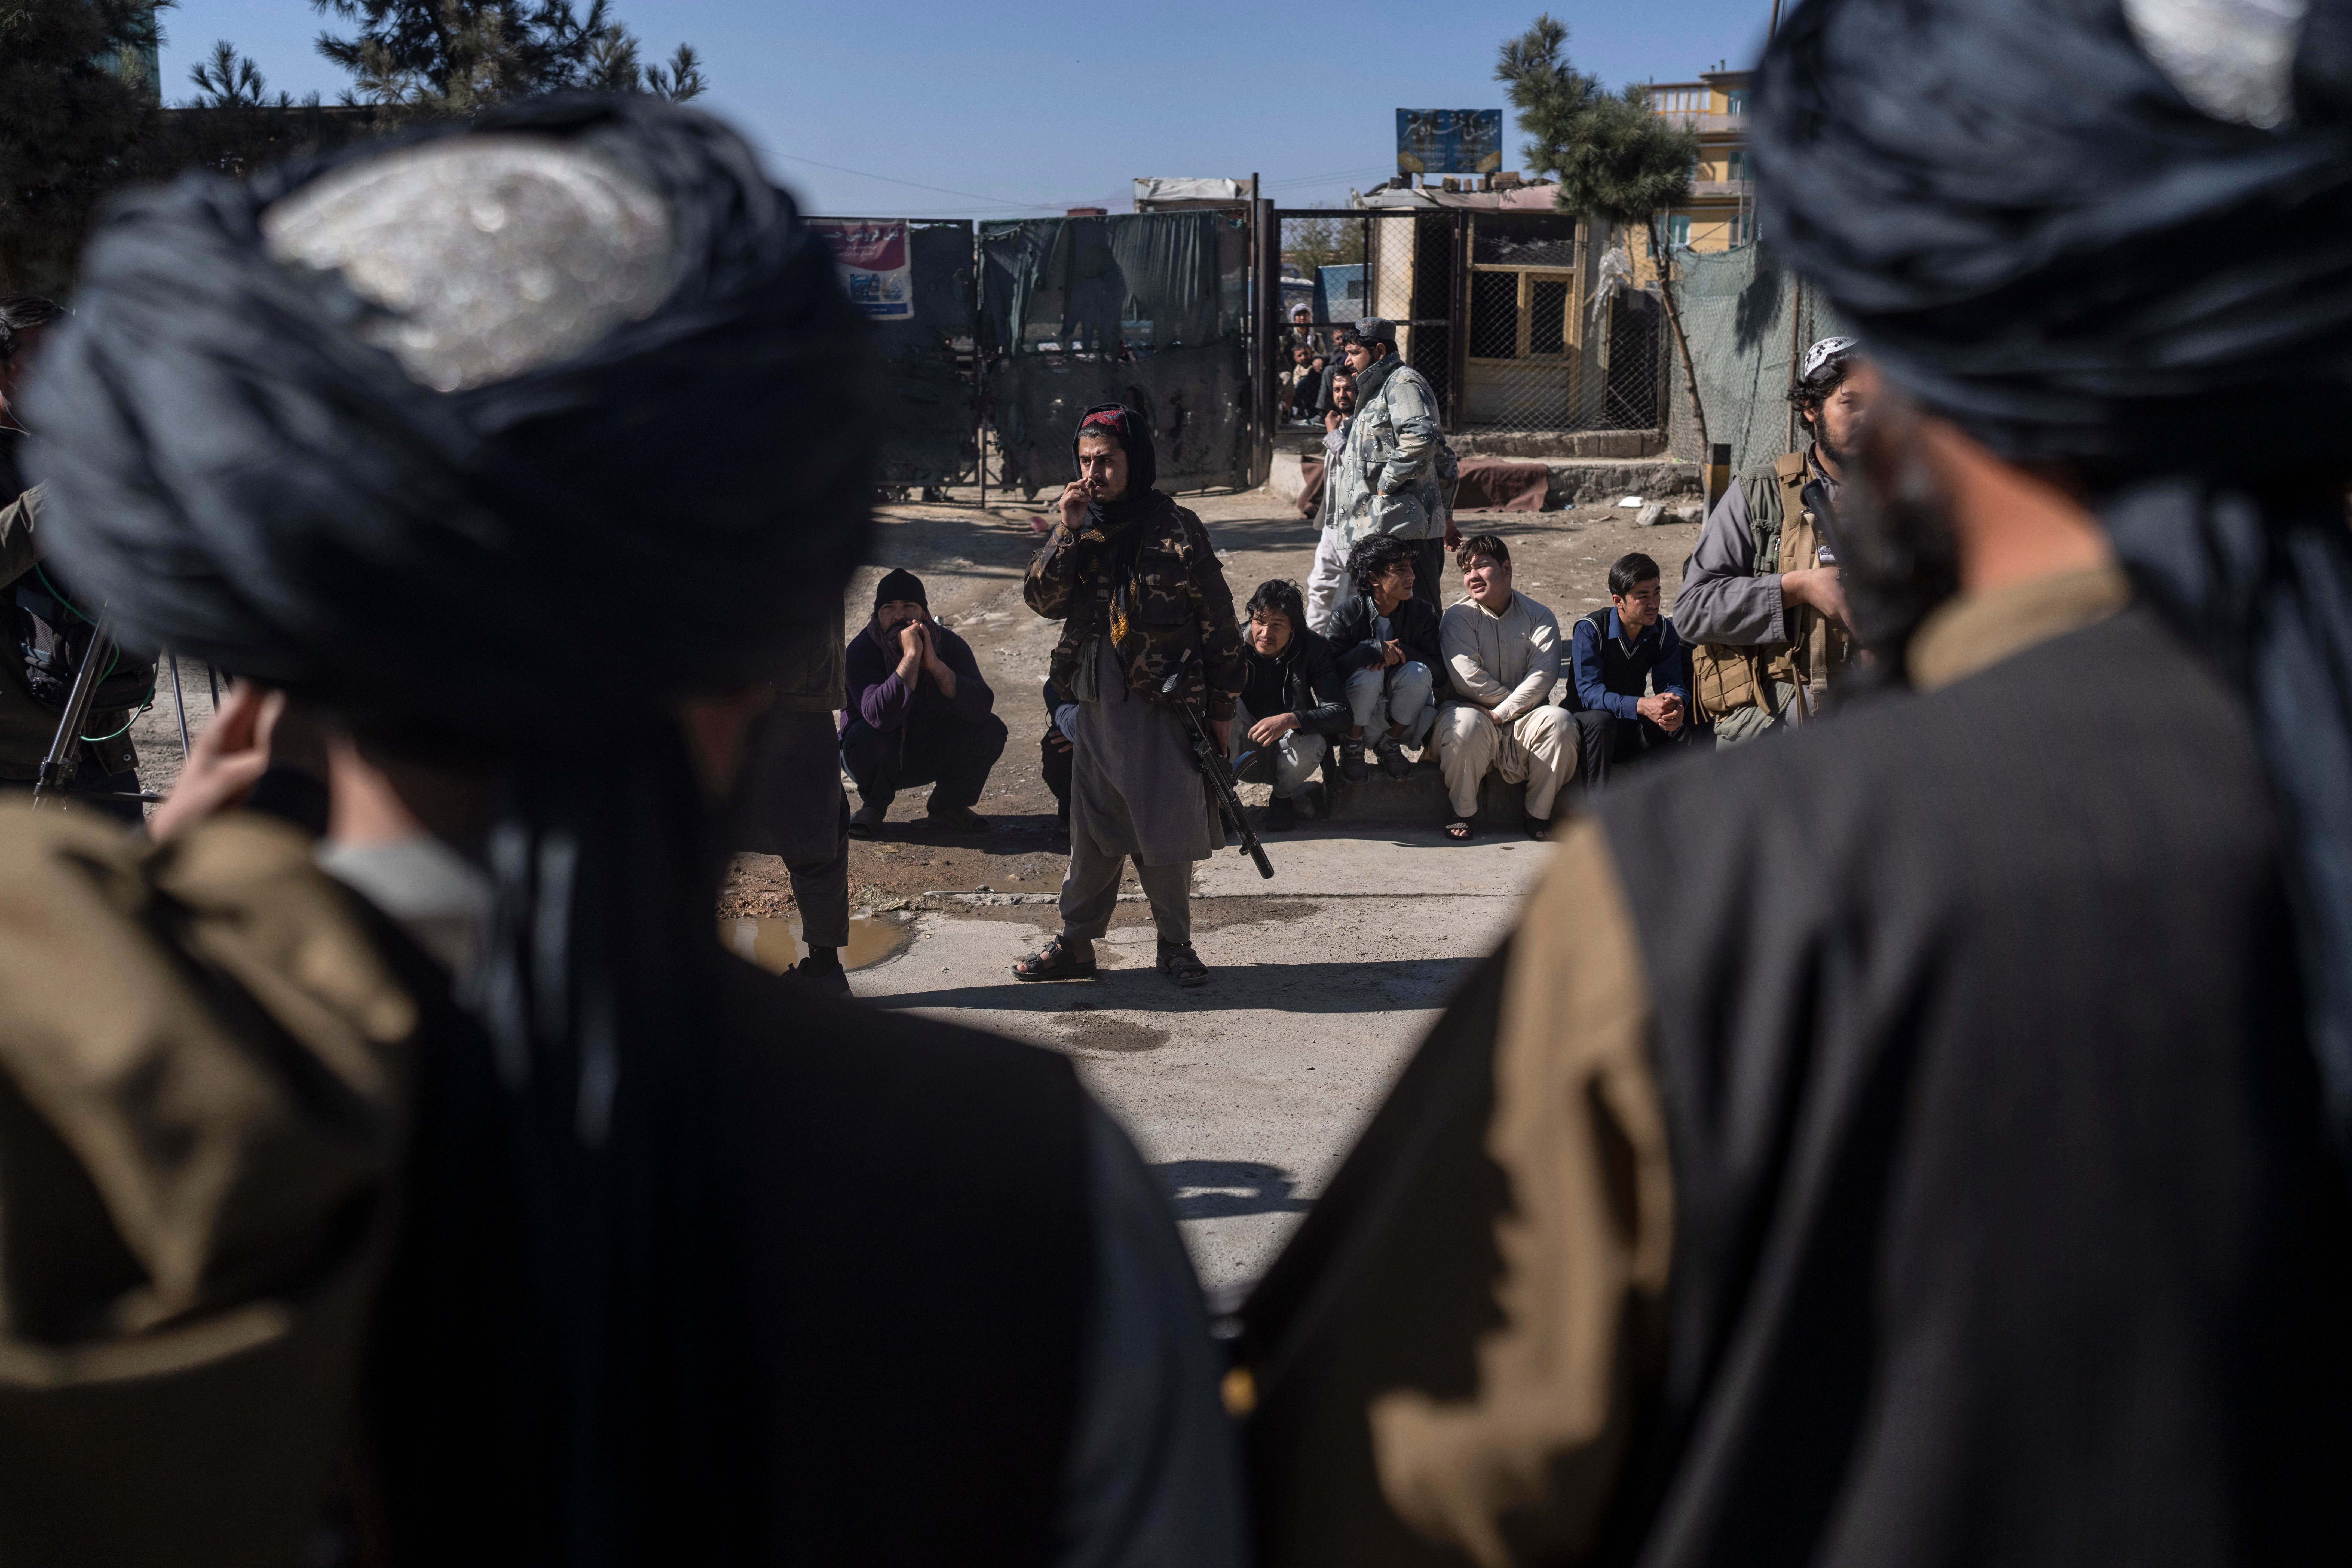 Taliban fighters secure the area after a roadside bomb went off in Kabul earlier this month